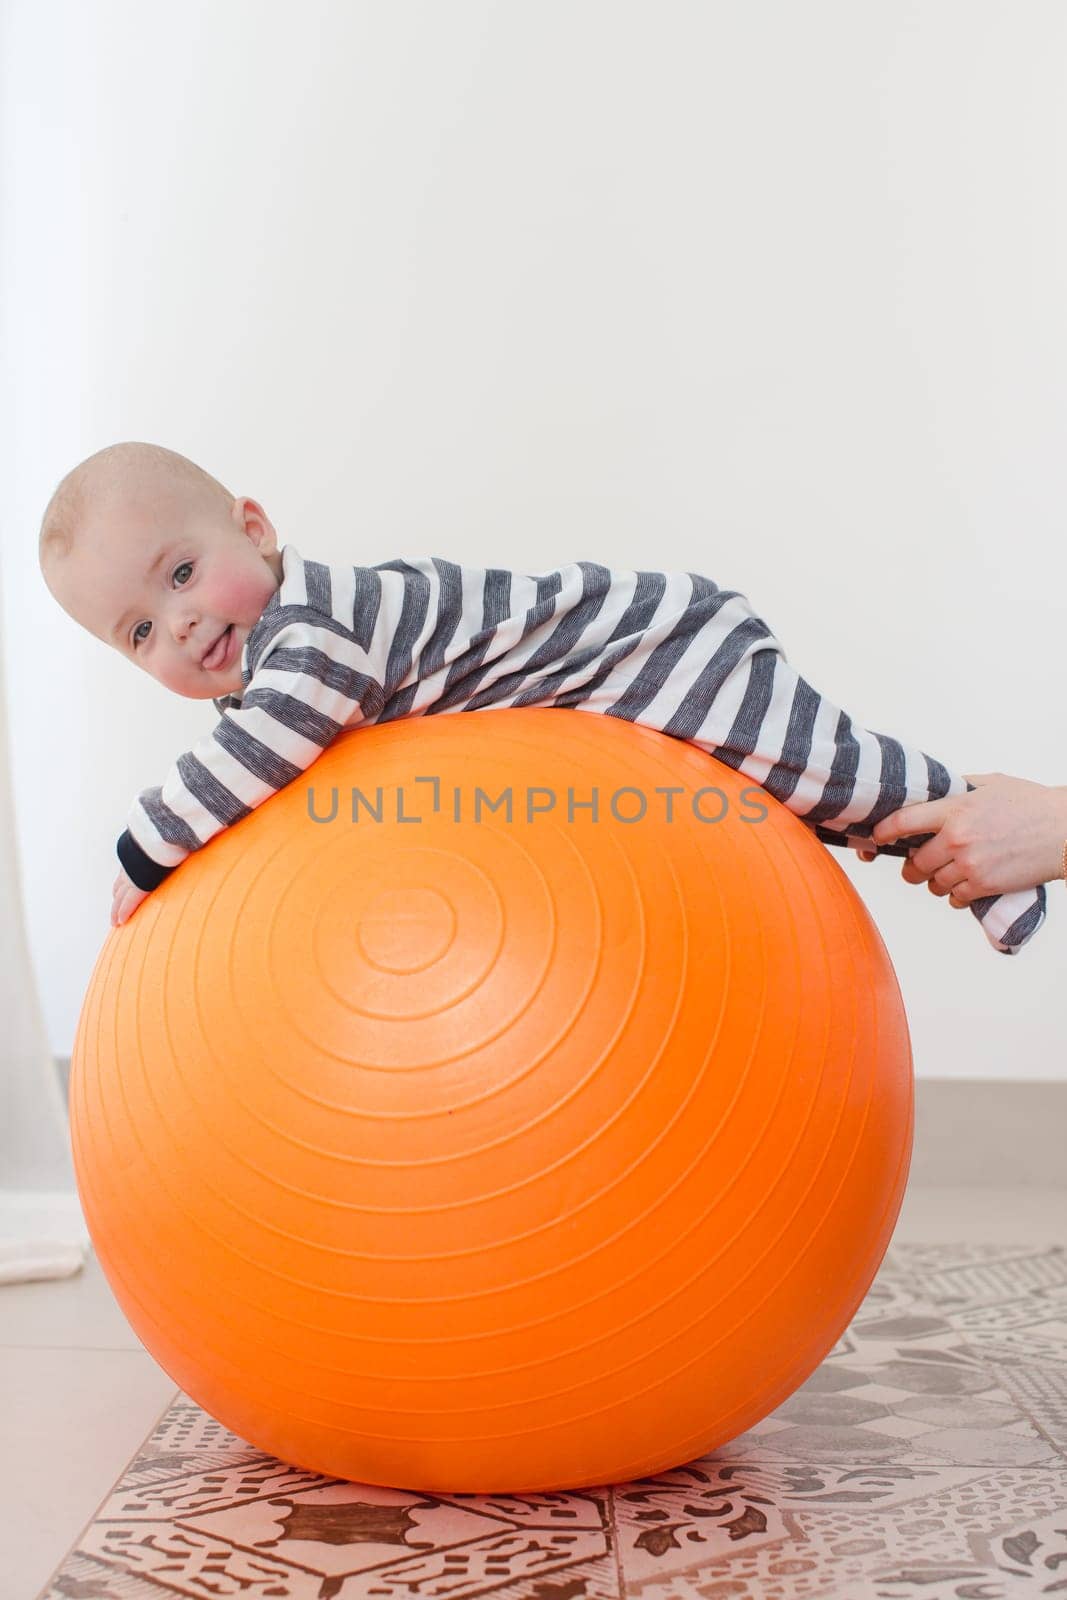 A little boy with tongue out lying on a fitball. Vertical studio shot.